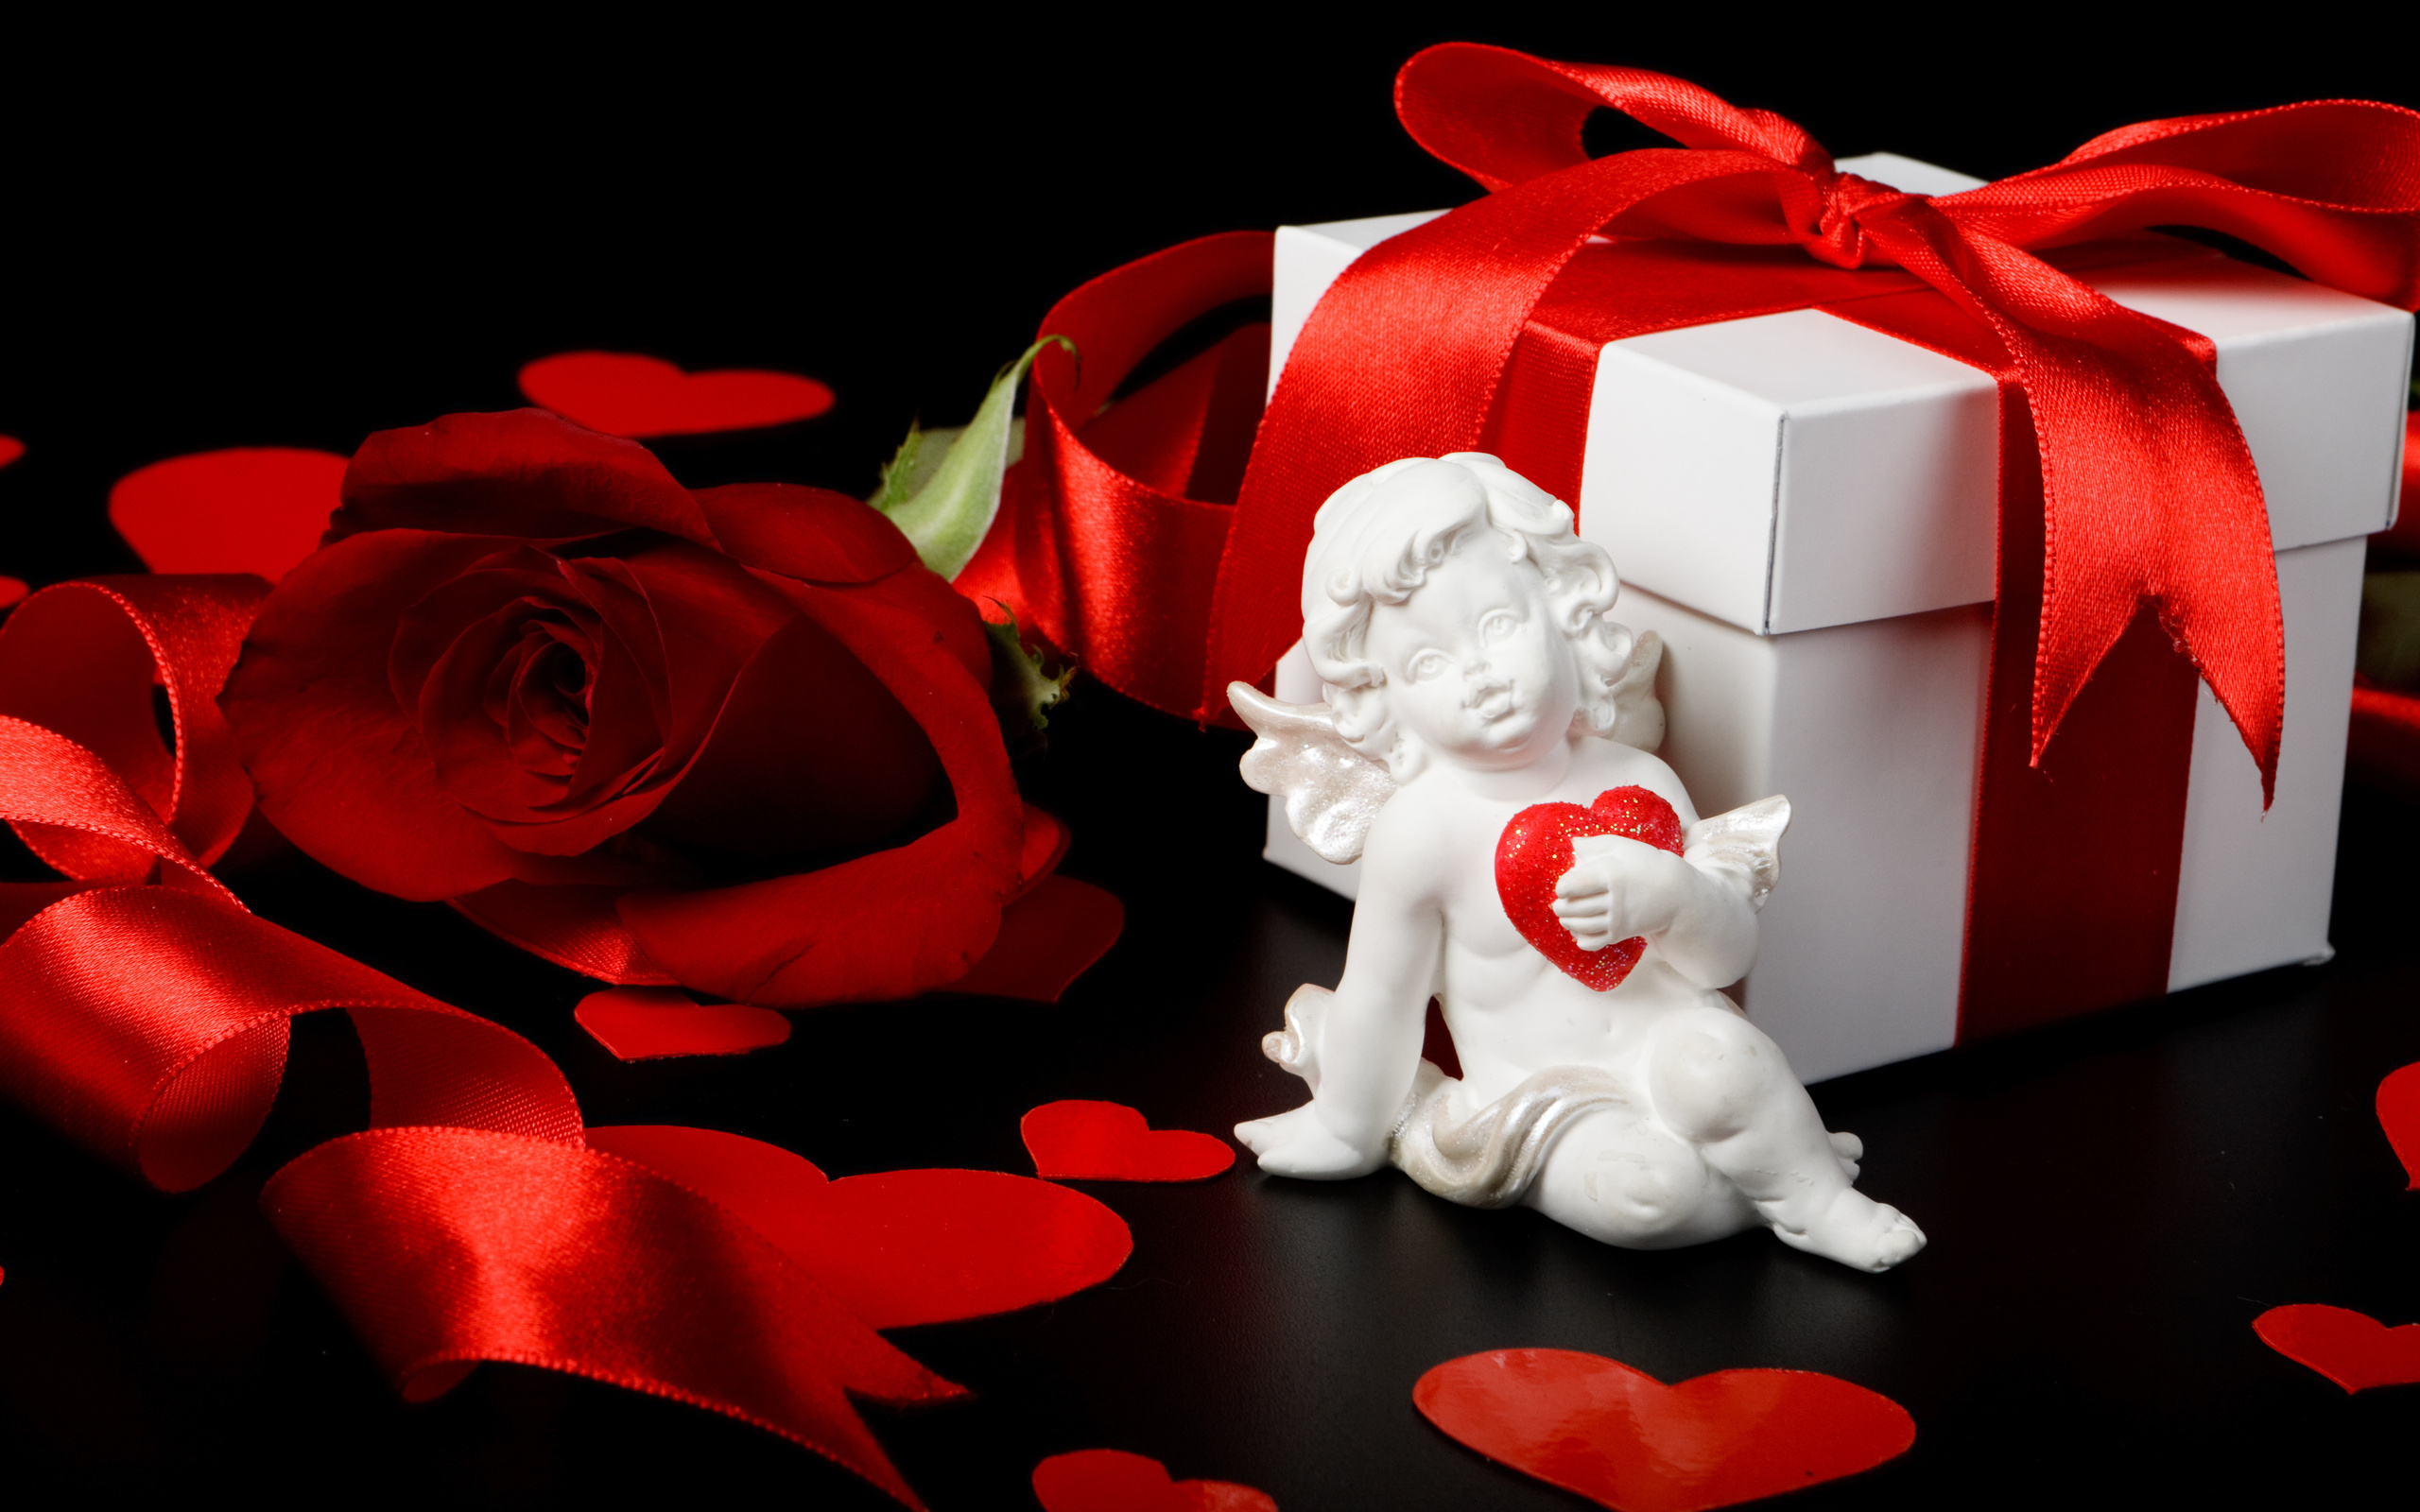 Holiday Valentine's Day HD Wallpaper